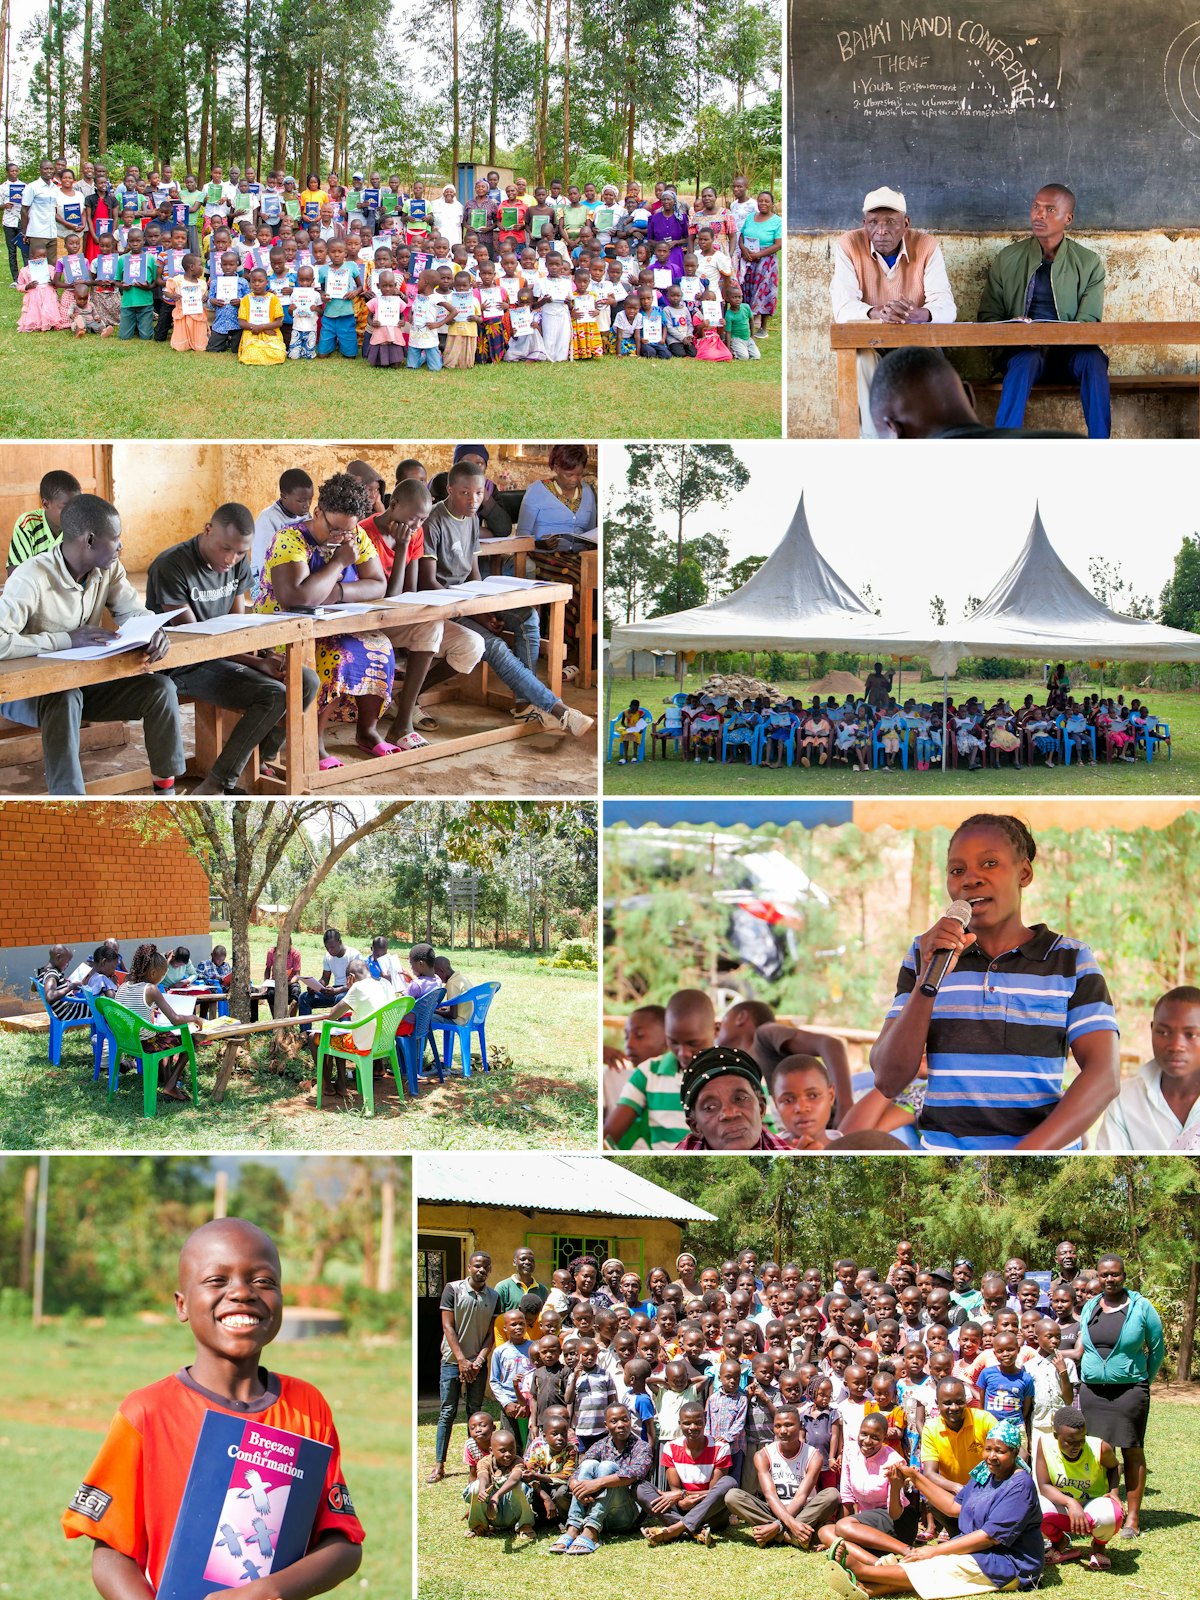 Over 200 conferences and gatherings are currently underway throughout Kenya. Pictured here are gatherings in Matete, Namarambi, Namawanga, Nandi-Kapsabet, and Lutali.